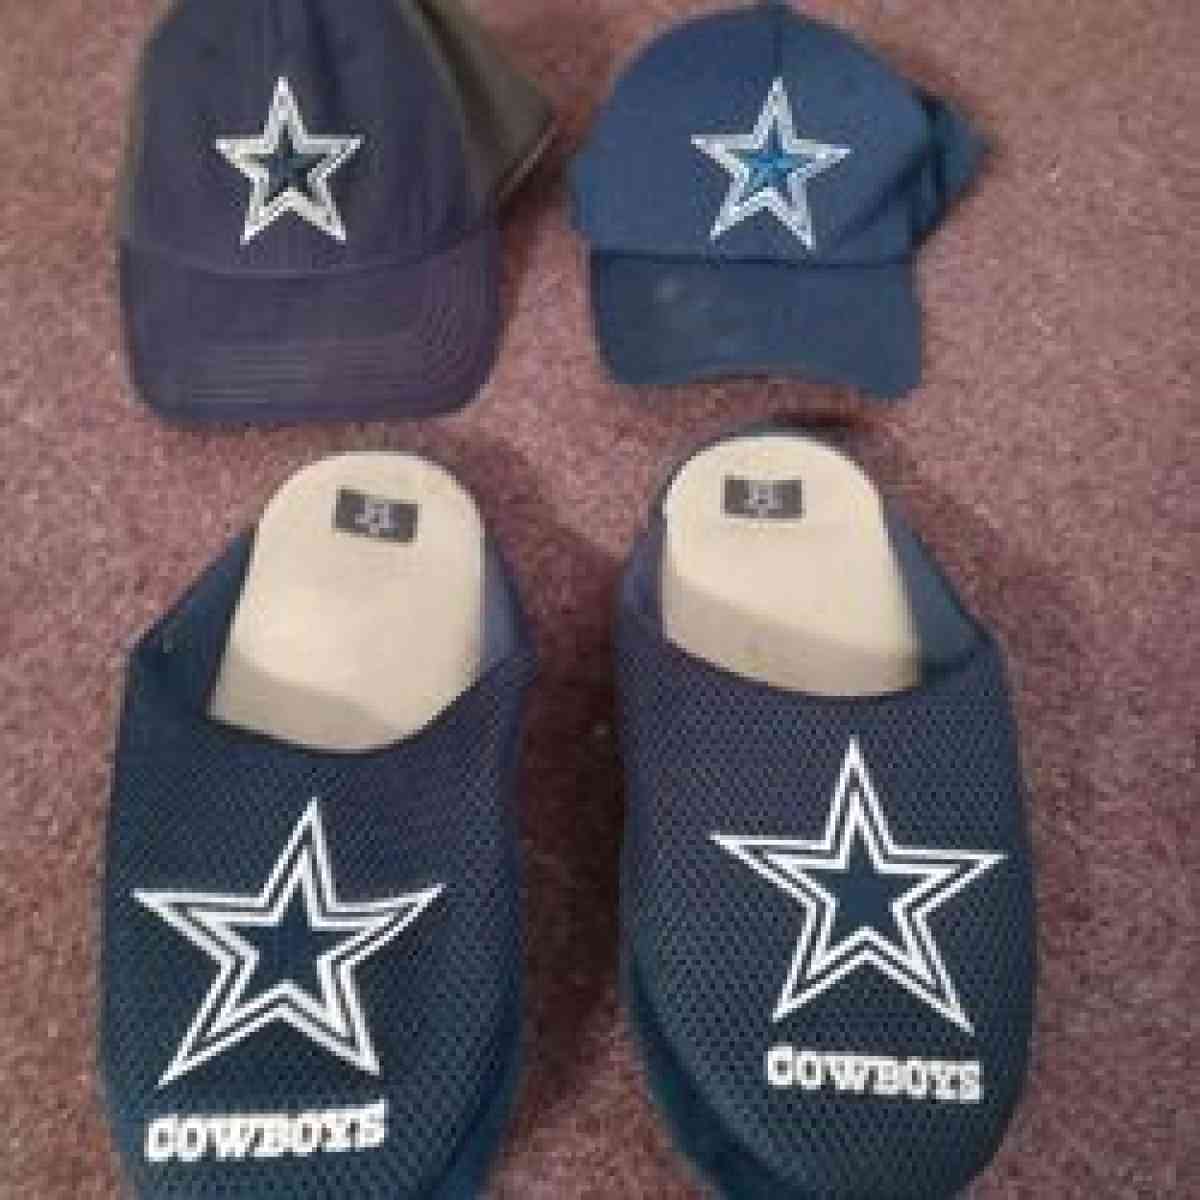 Dallas Cowboys caps and house shoes